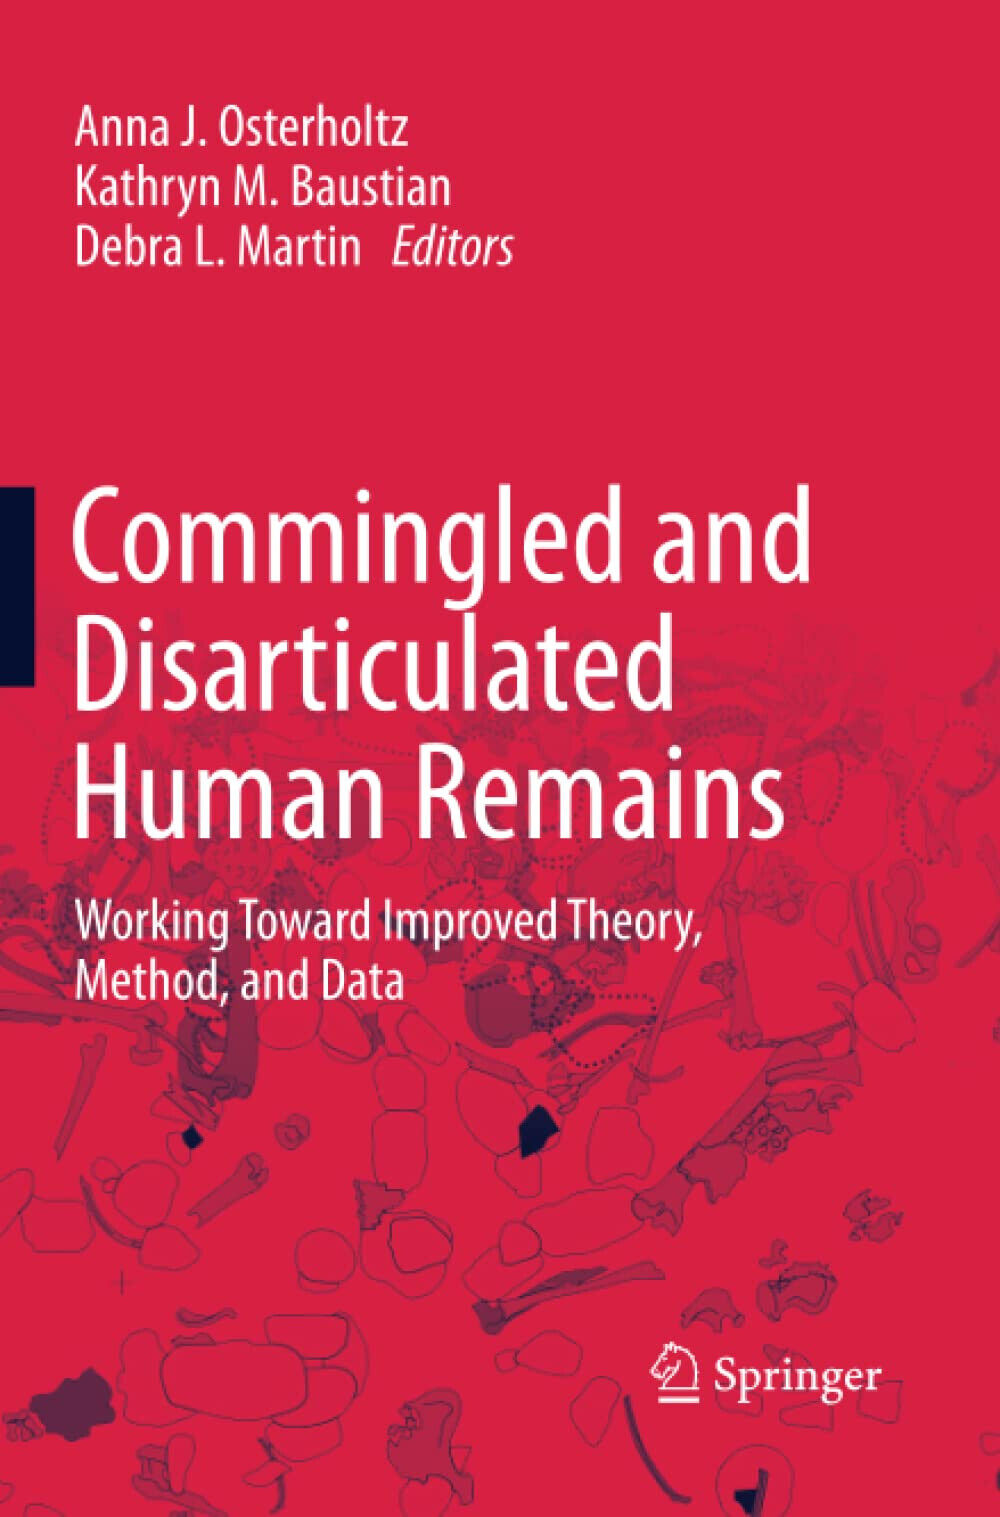 Commingled and Disarticulated Human Remains - Anna J. Osterholtz - Springer,2015